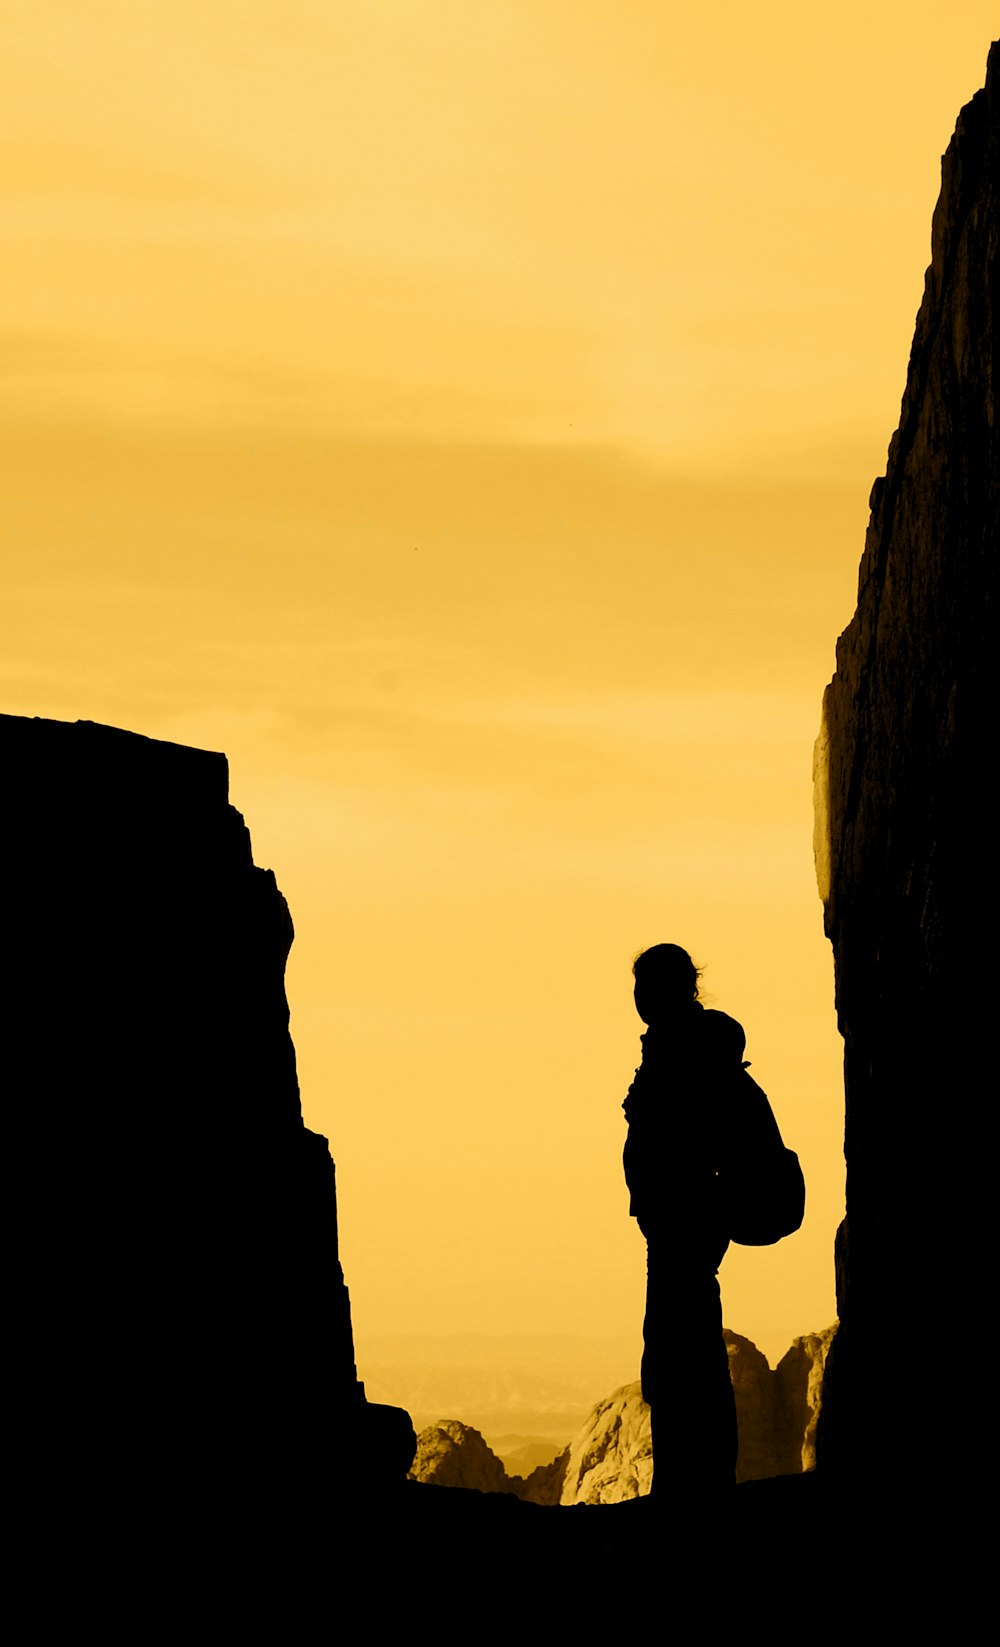 silhouette of person standing in between rocks